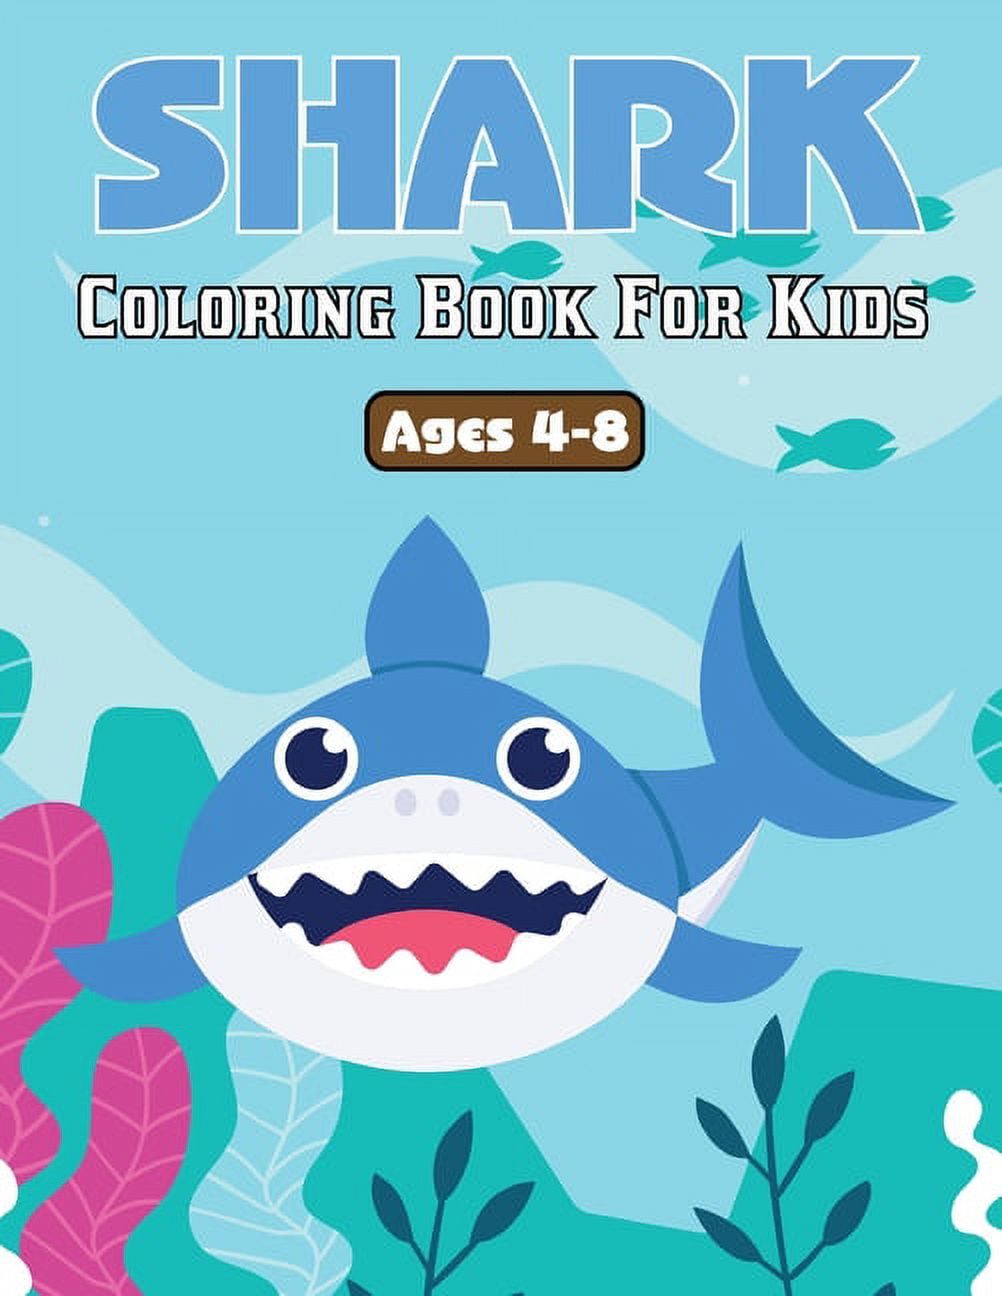 Shark Coloring Book For Adults: An Adult Shark Coloring Book For Adults -  Gift Idea For Men And Women.Vol-1 (Paperback)